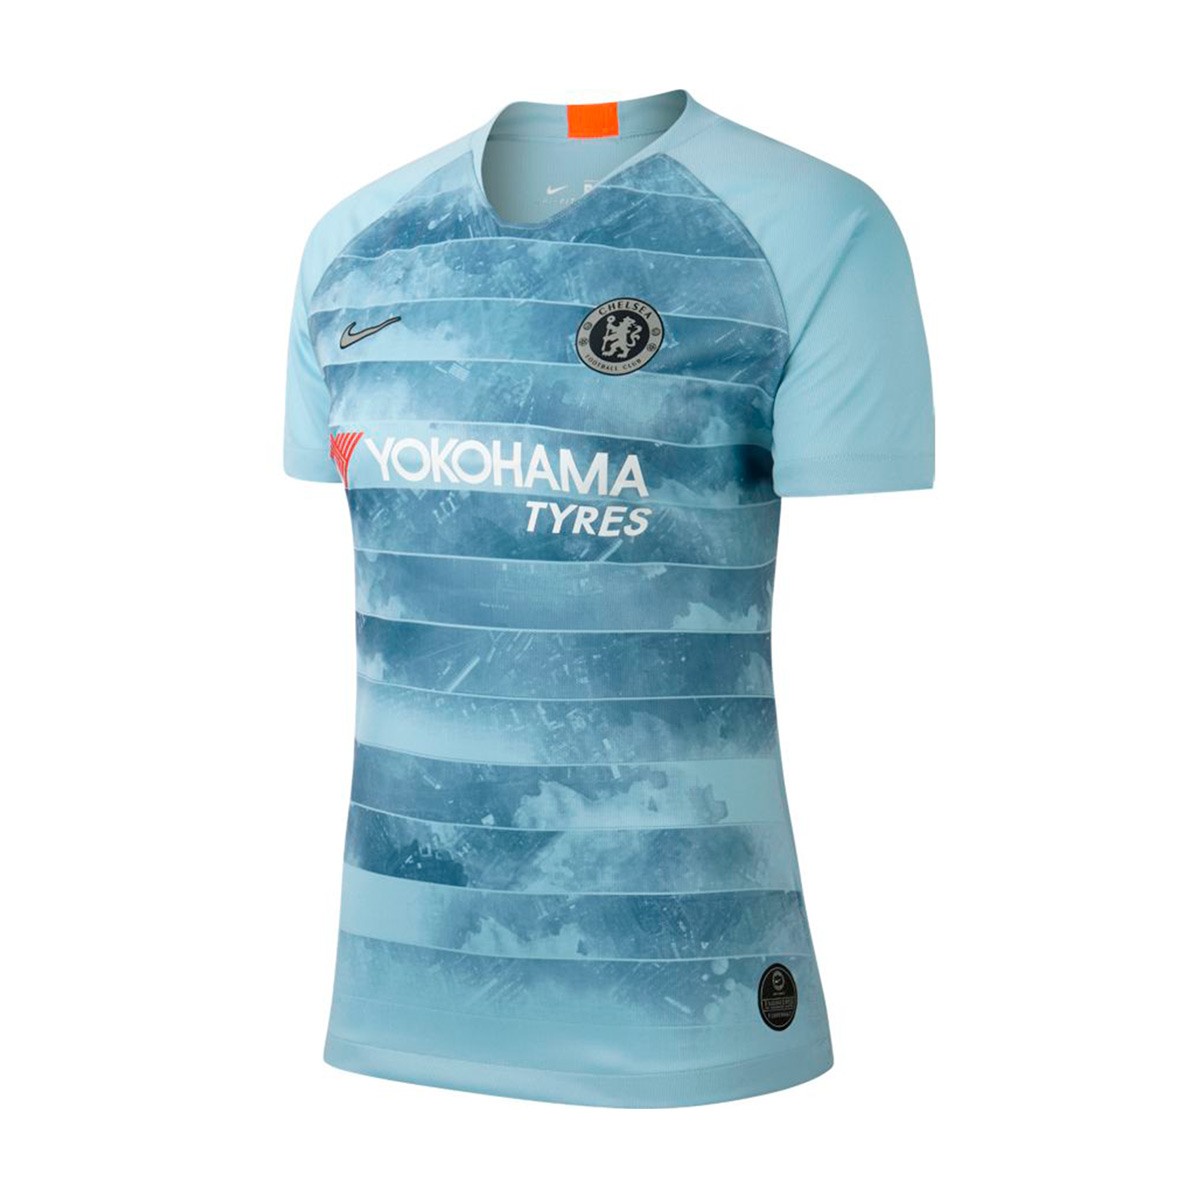 chelsea 2018 to 2019 jersey